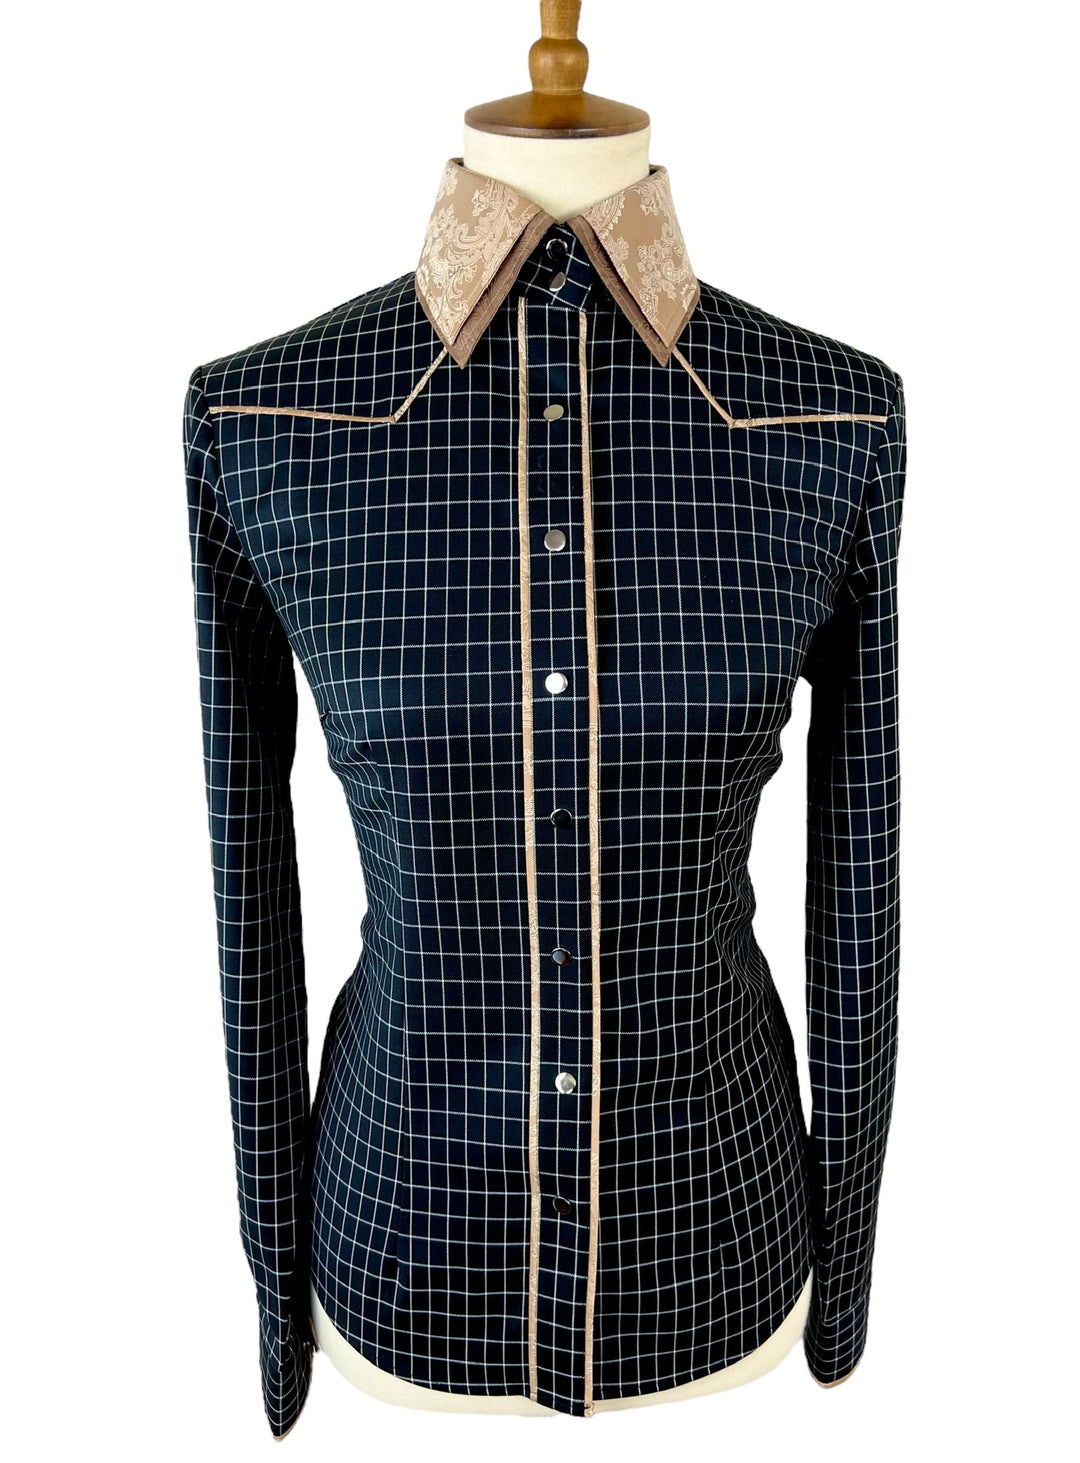 The Blakely Western Shirt